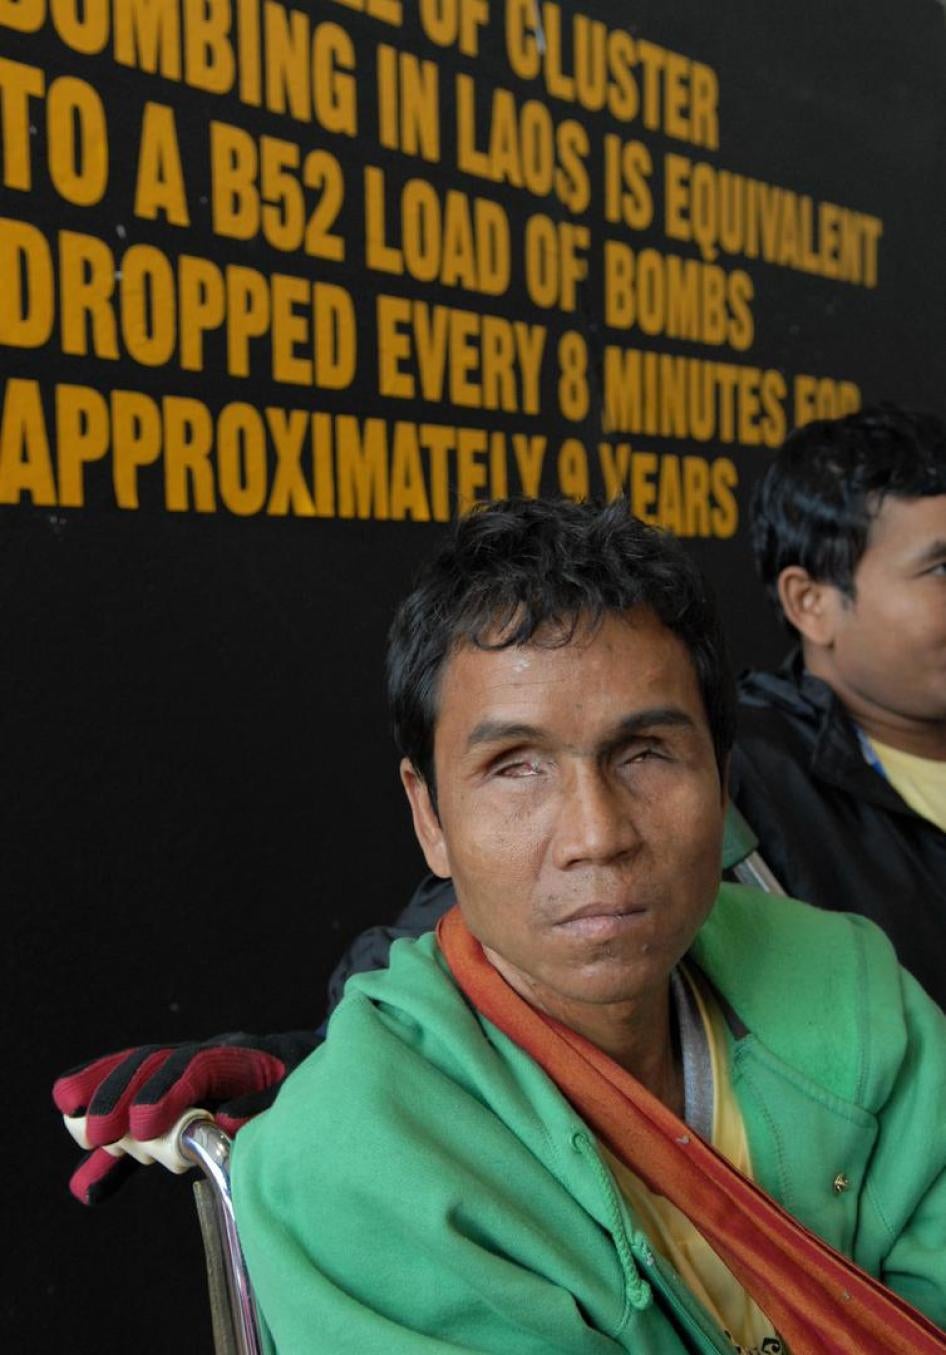 Cambodian Youen Sam En participated in the Dublin negotiations of the 2008 Convention on Cluster Munitions. He lost his eyesight and both hands when an submunition exploded.